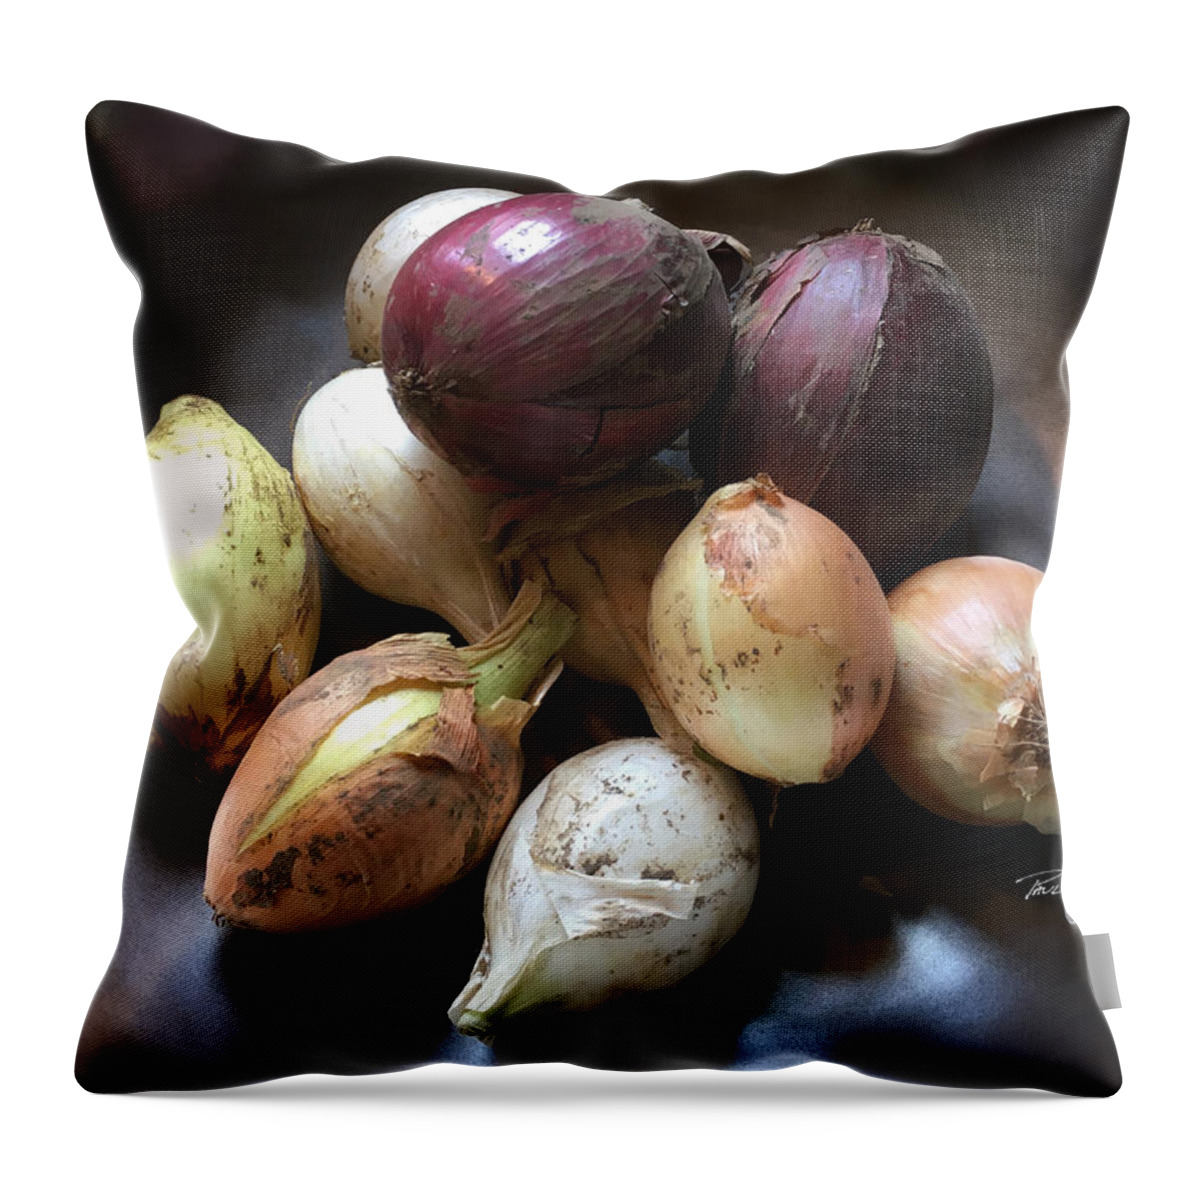 Onions Throw Pillow featuring the photograph Onions by Paul Gaj